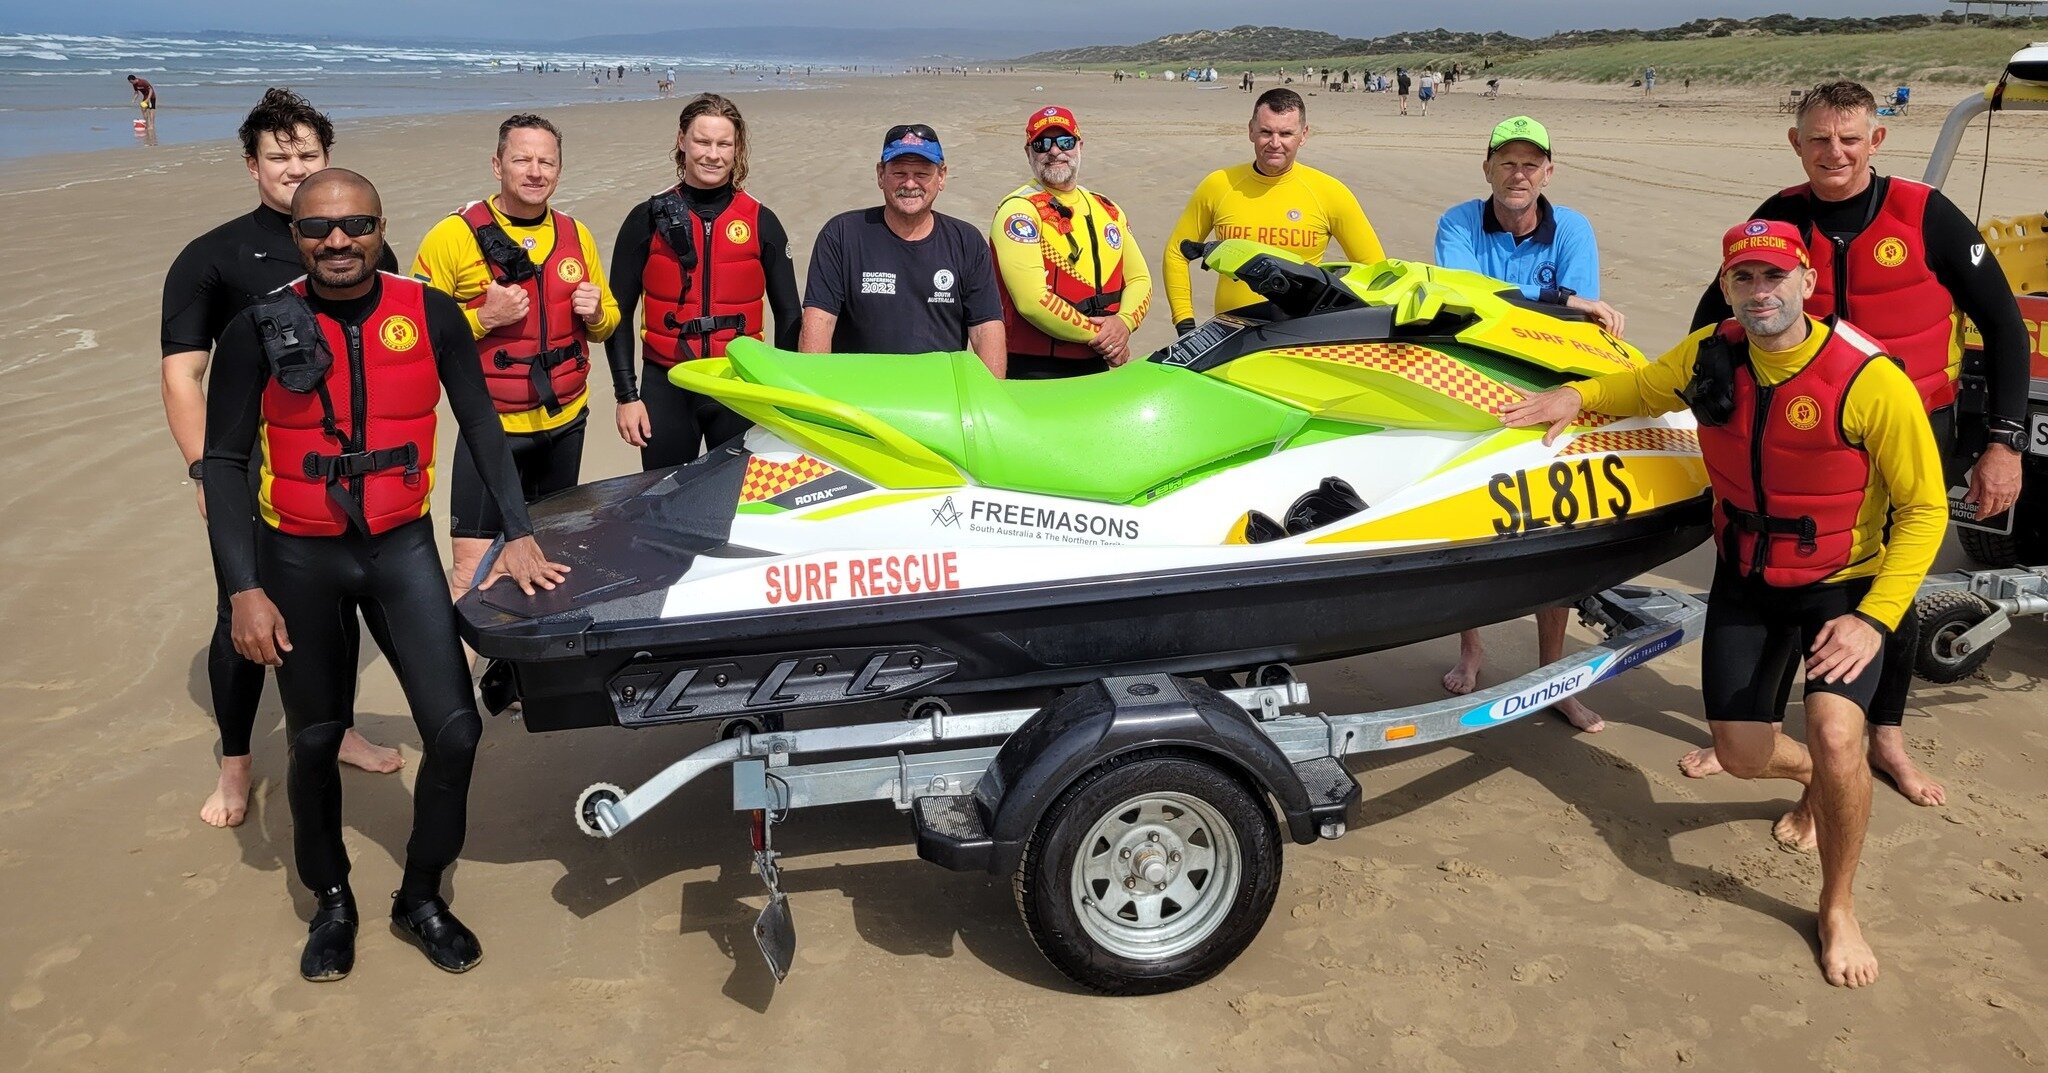 It was a big weekend for our Emergency Operations Group, with eight surf lifesavers completing their RWC assessment 👏

Congratulations to Jeff Mews, James Butler, Peter Christensen, Shayan Gunawardena, Arne Meyer, Eddy Newberry, Tommy Newberry and A